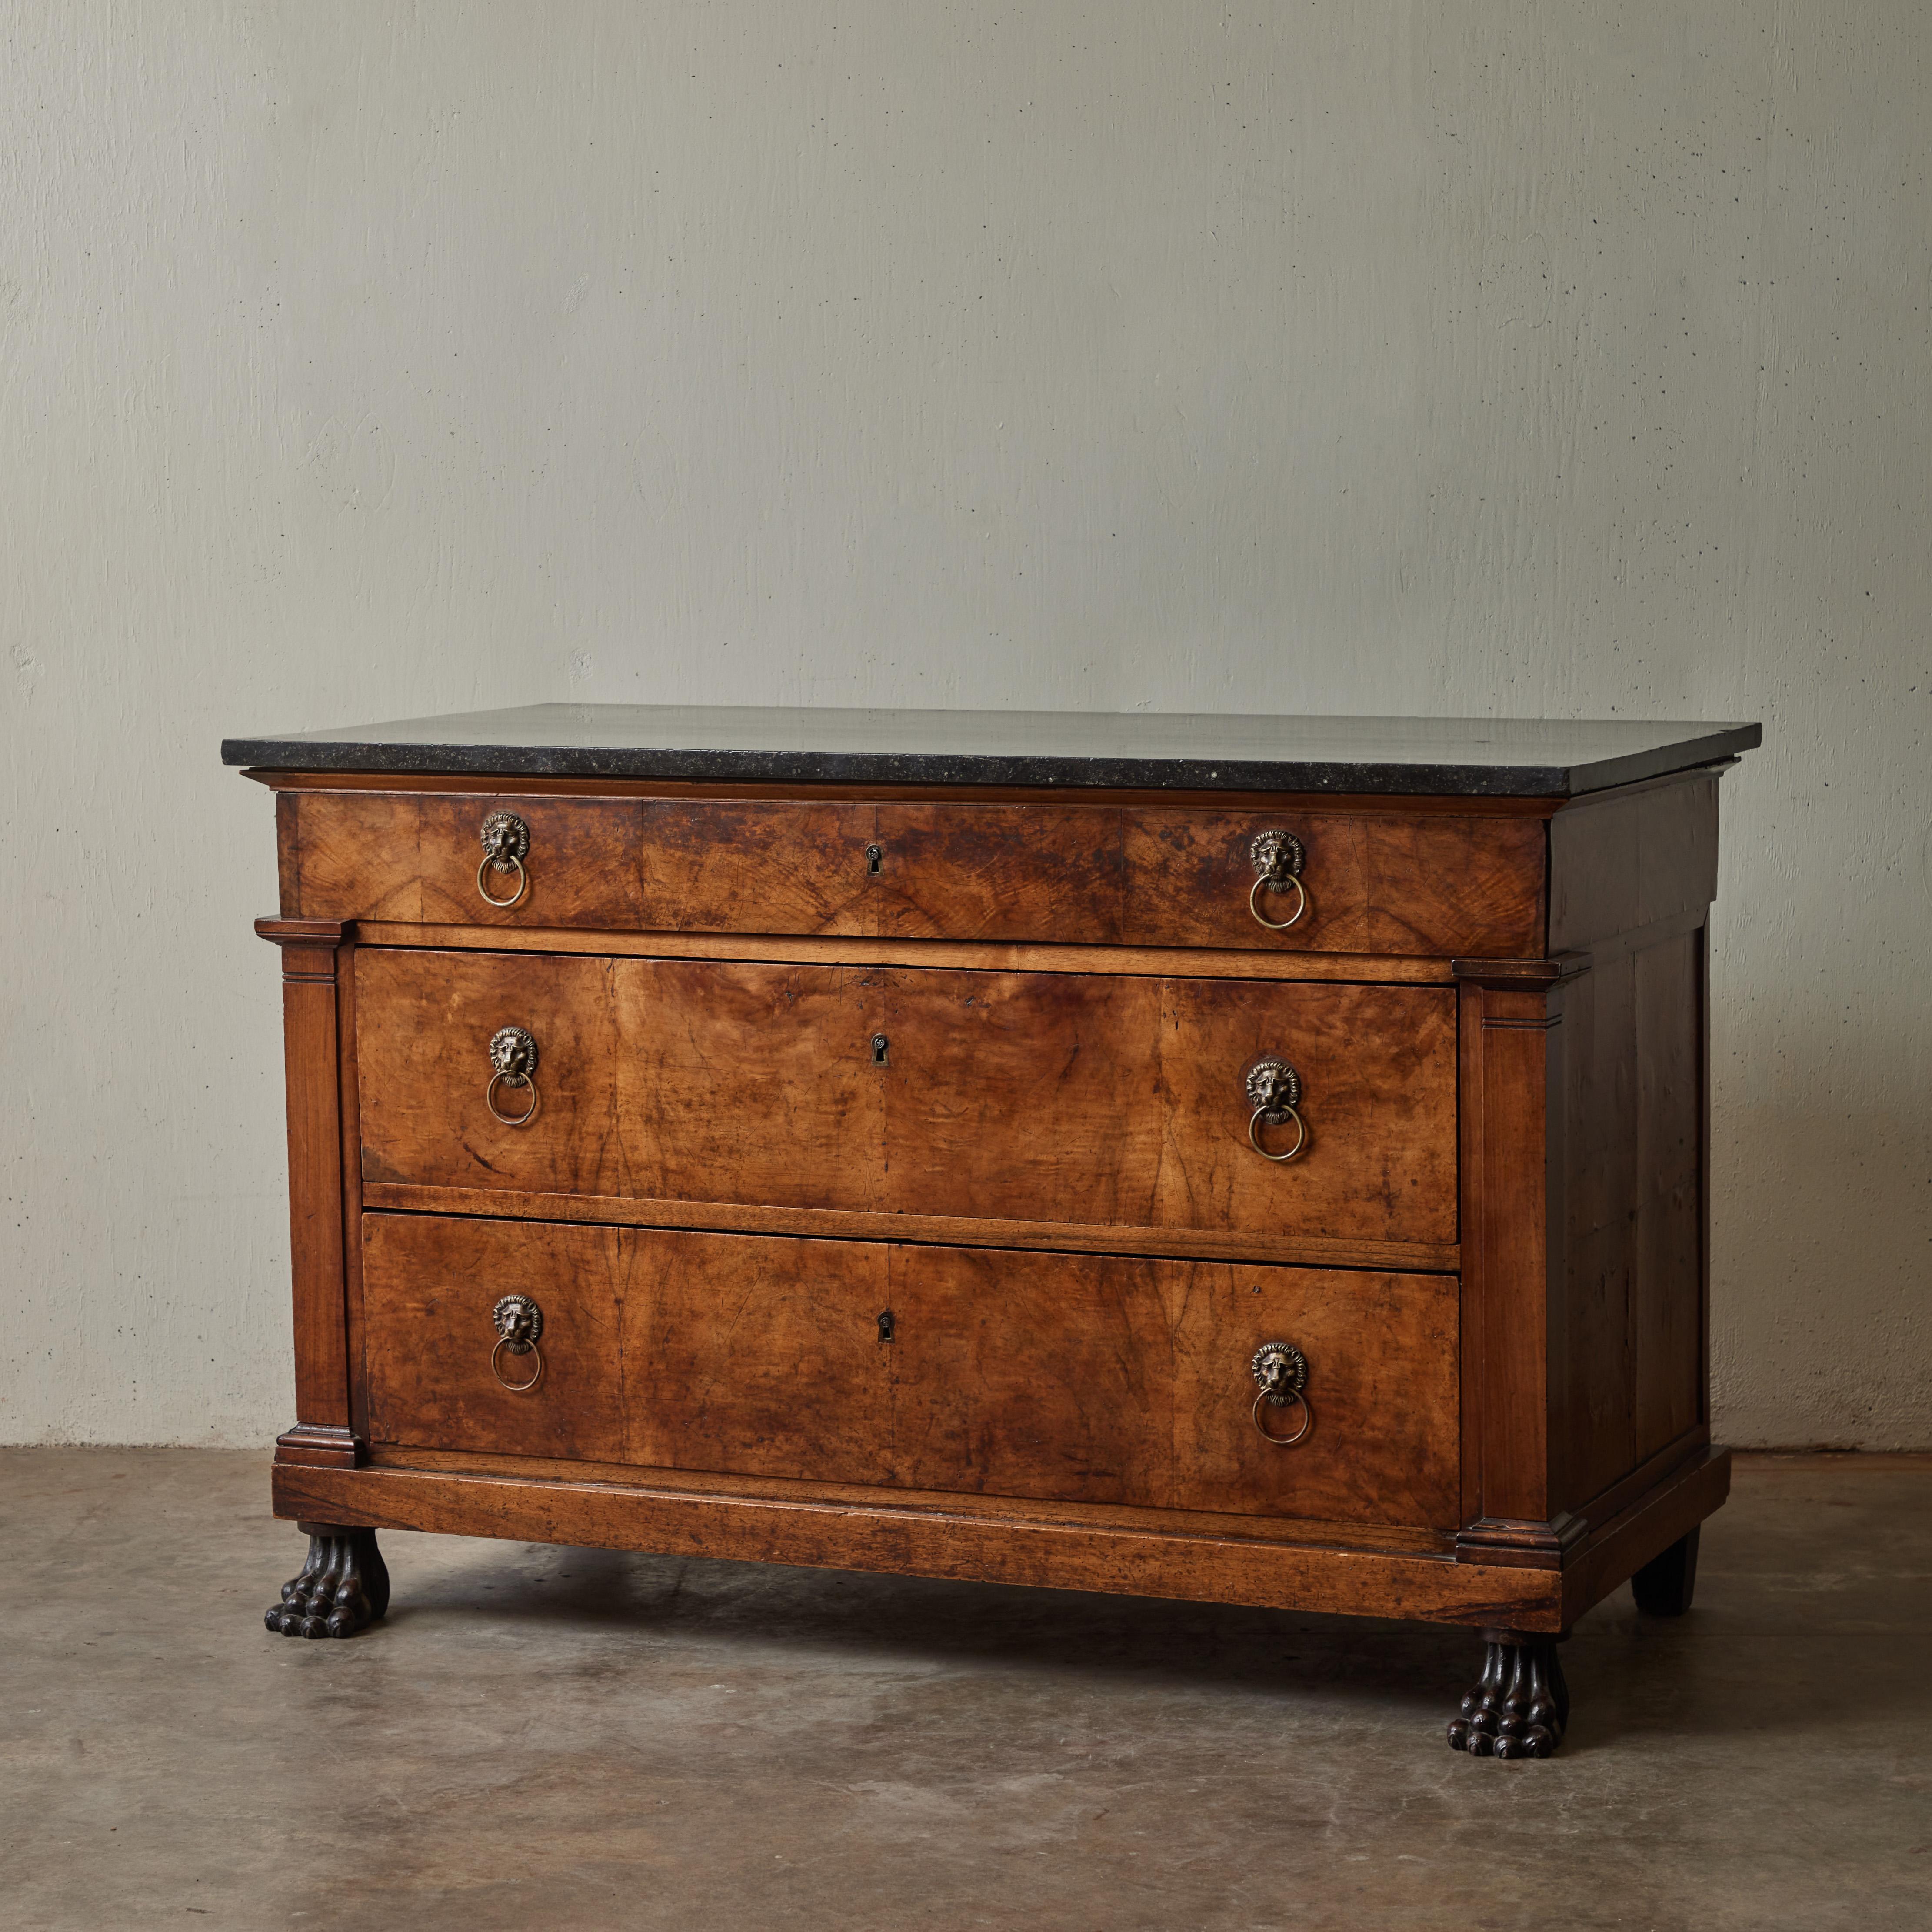 An early 19th-century French Empire style chest of drawers in walnut with black marble top, carved claw feet, and brass lion's head ring-pull handles. The warm, honey-toned wood has a rich visual texture, which complements that of its top. The